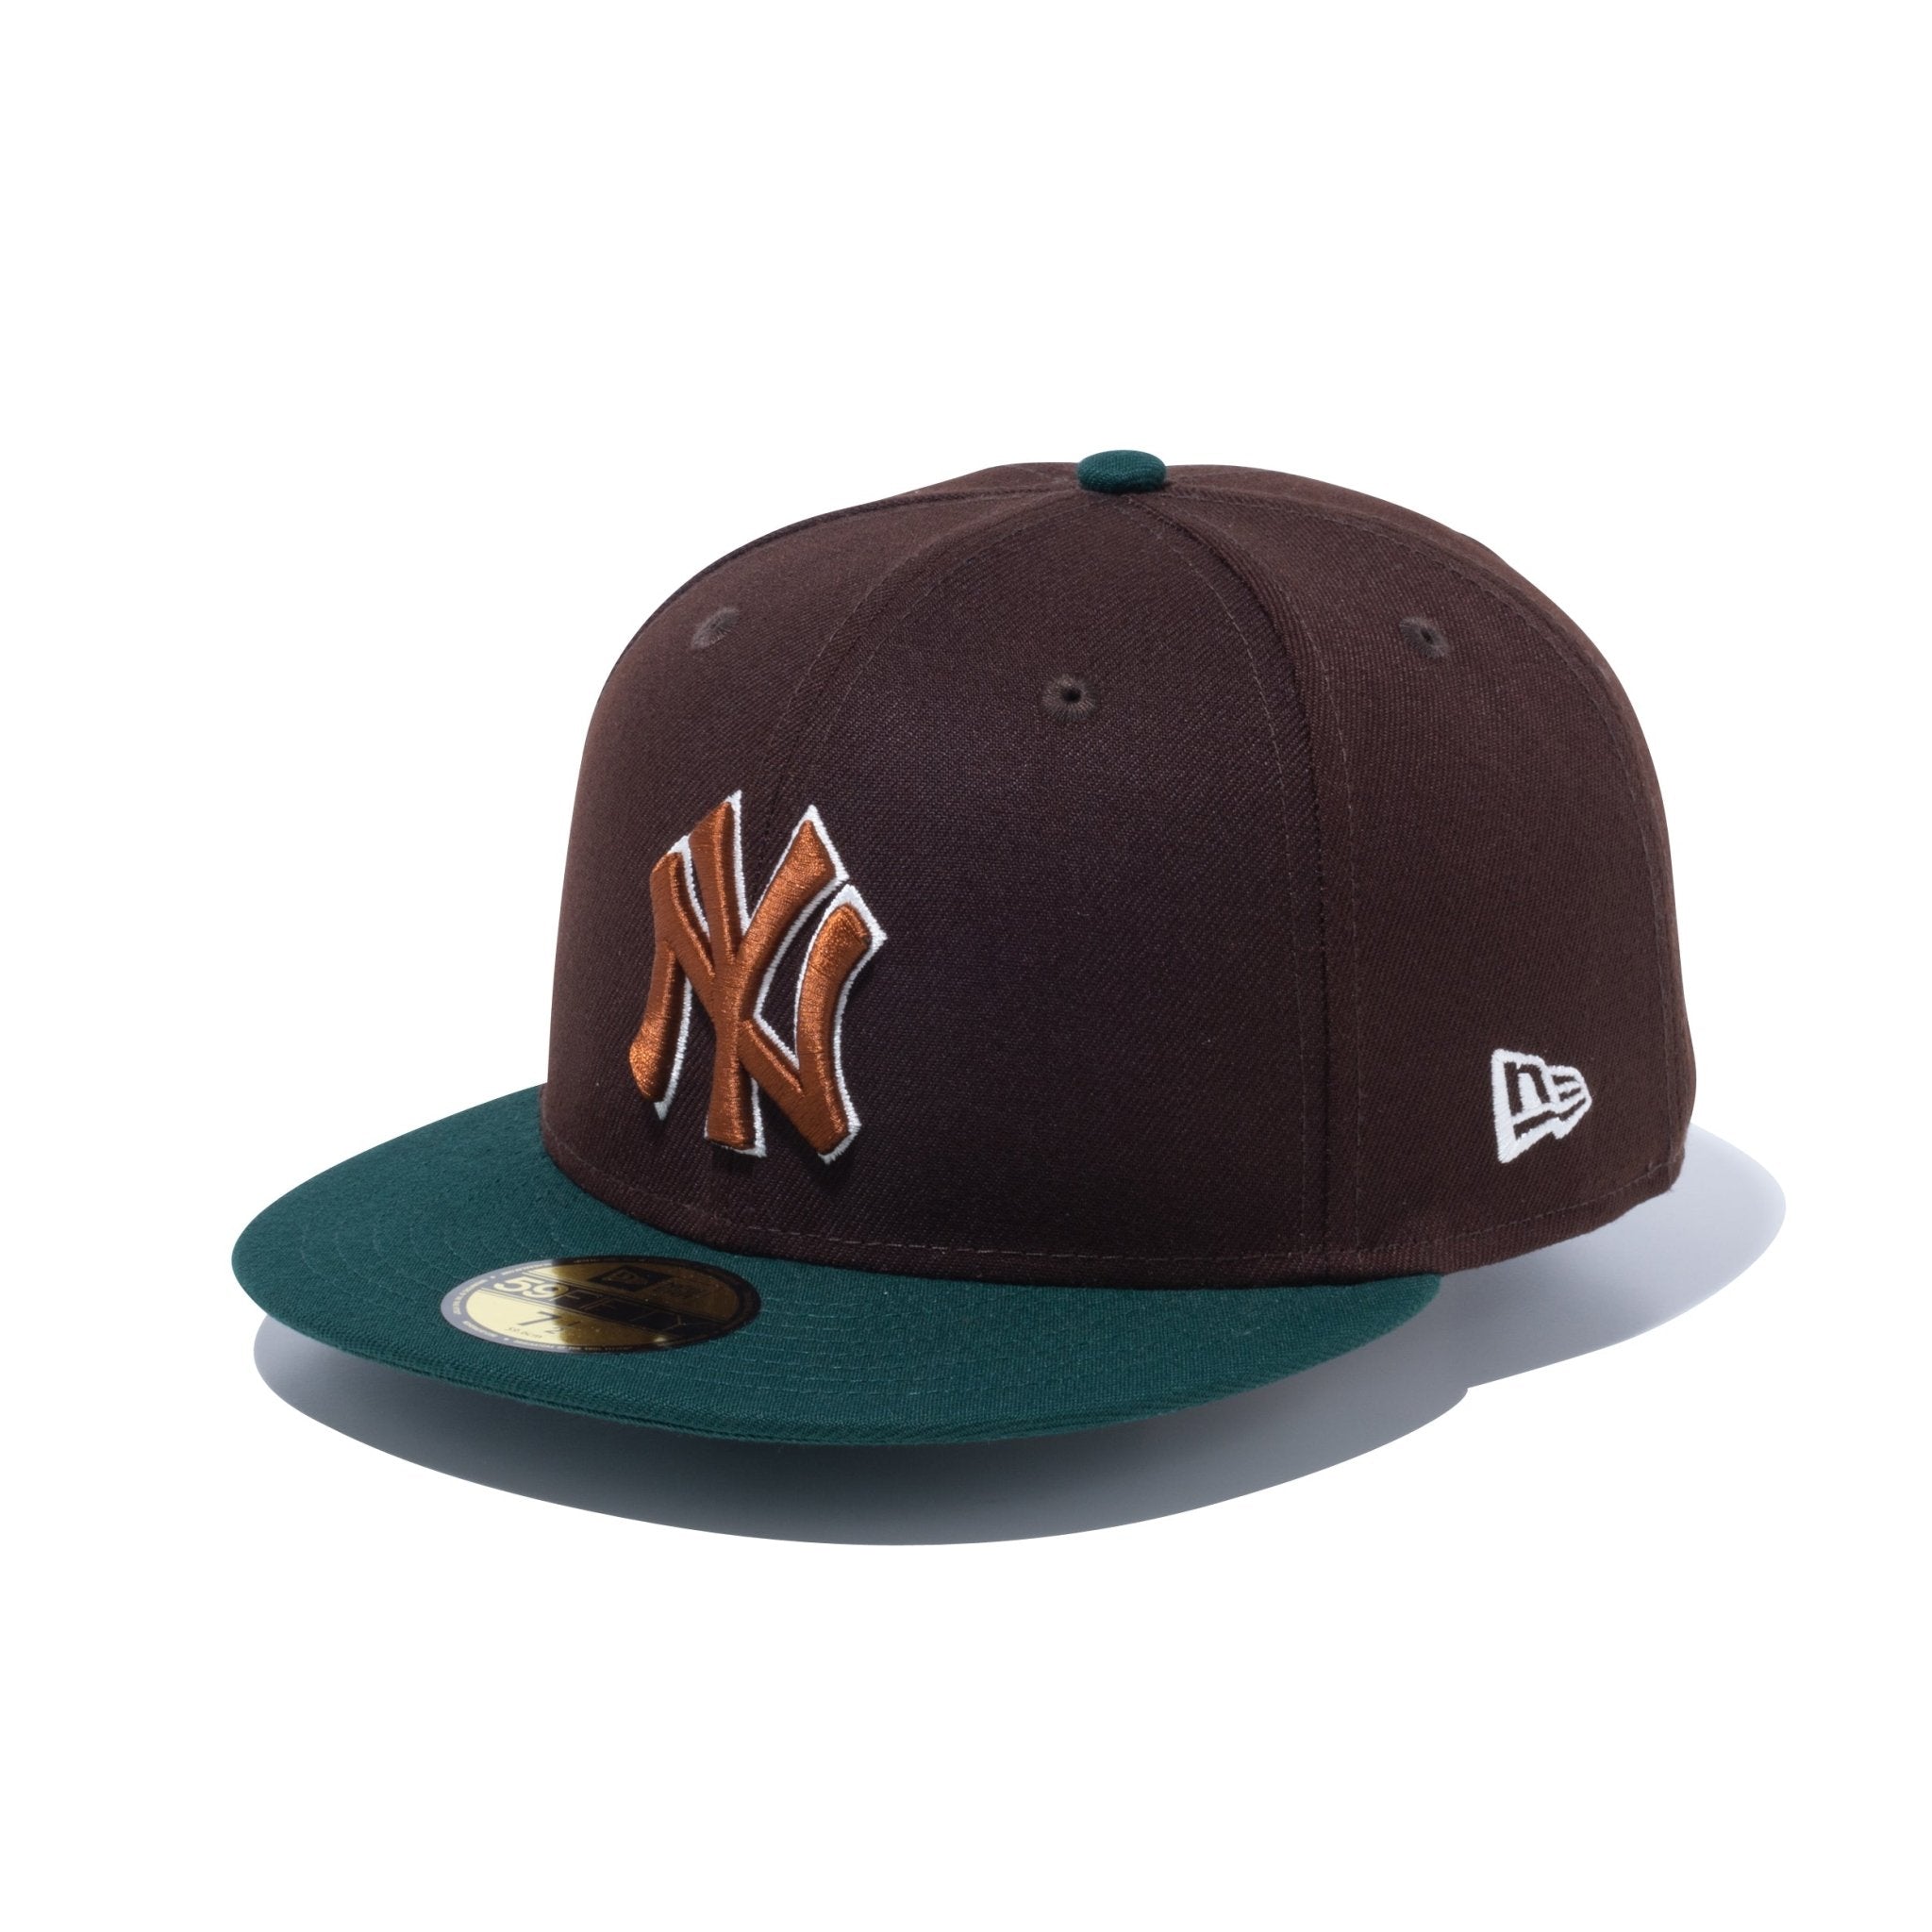 59FIFTY Beef and Broccoli ニューヨーク・ヤンキース バーント 